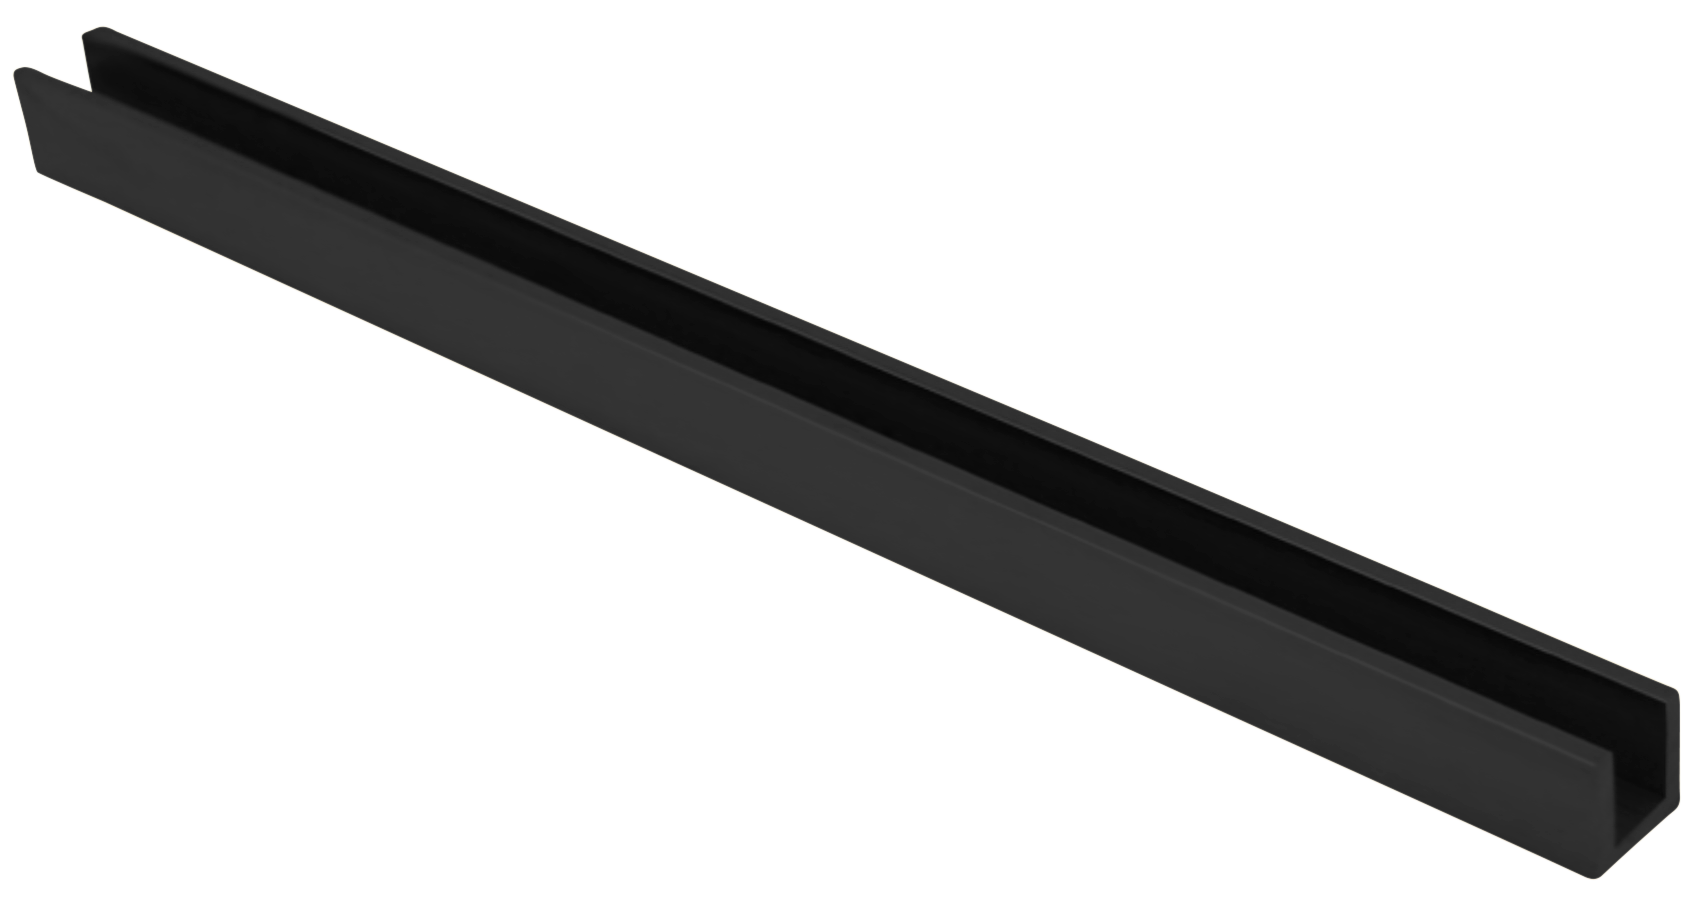 Flat back u-channel with 1/2" opening - 95" long - All finishes Matte Black